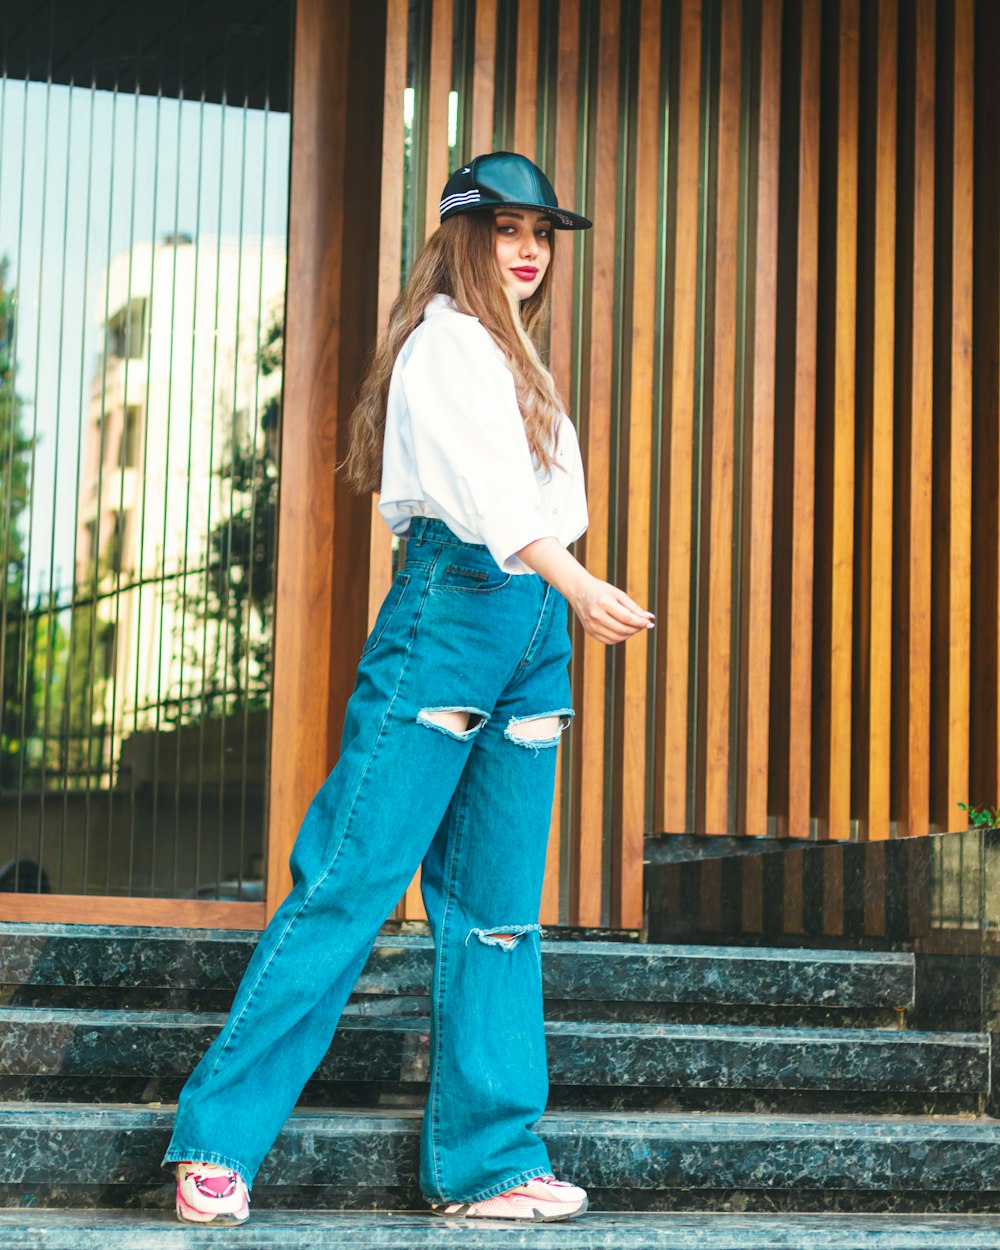 a woman standing on steps wearing a hat and jeans